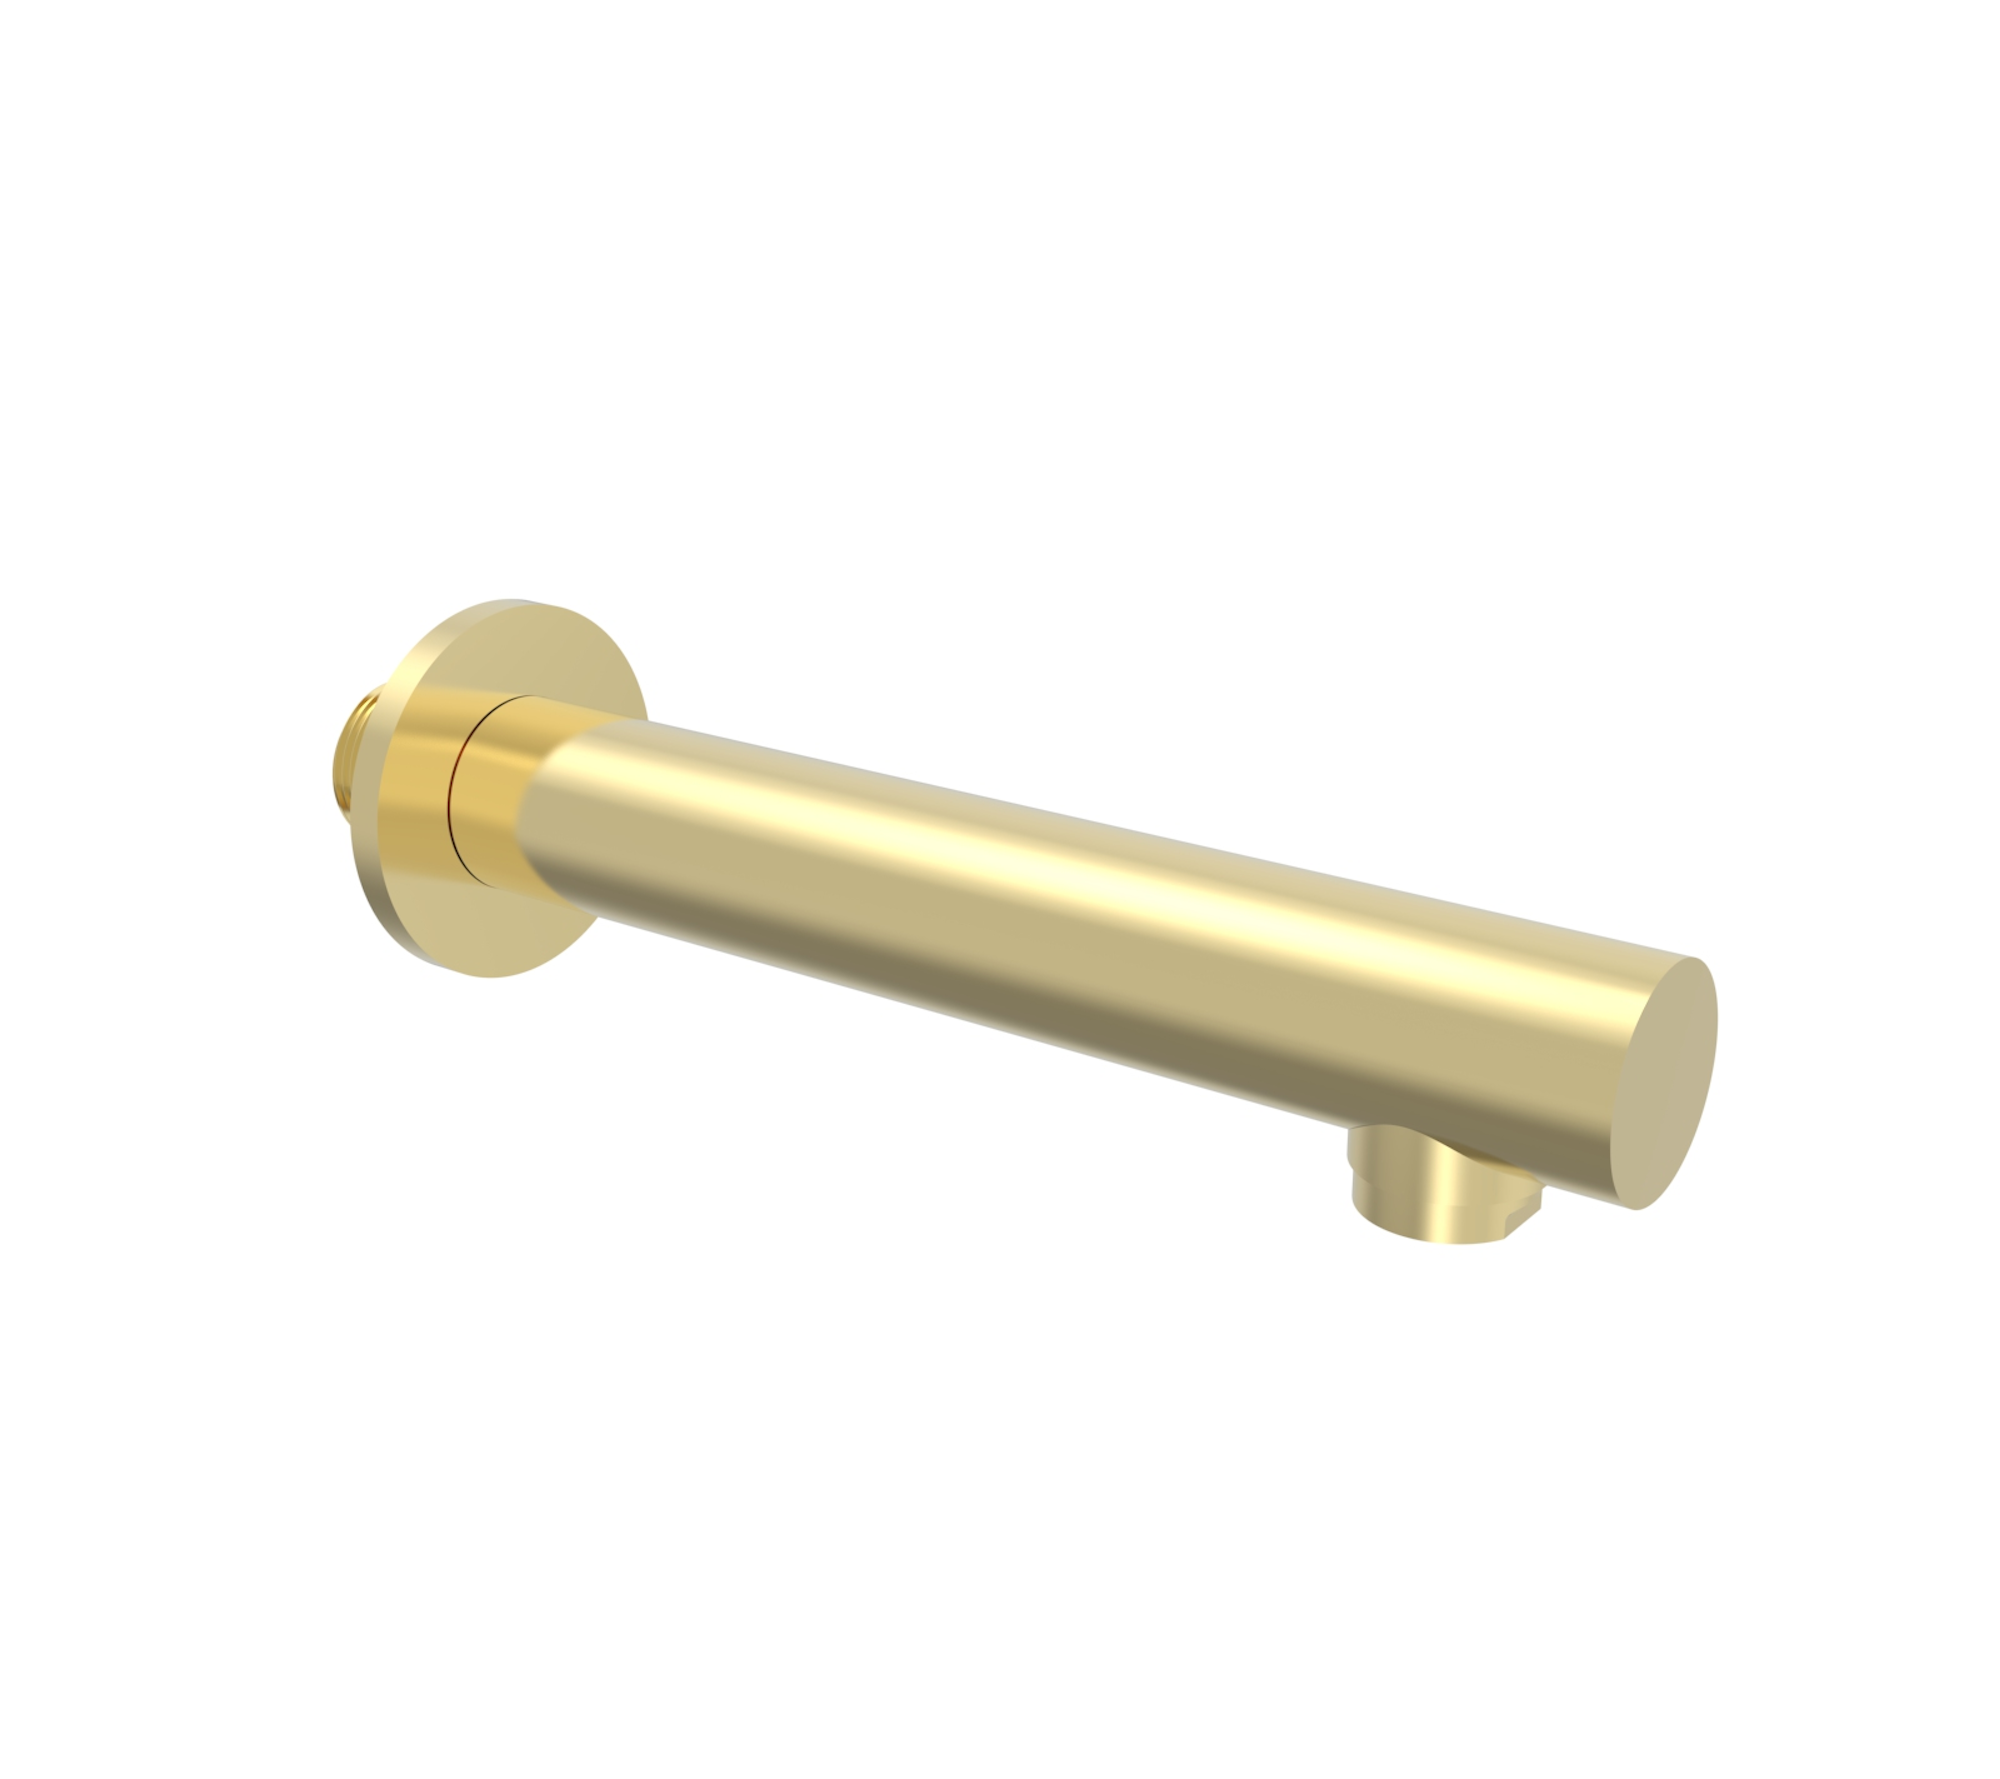 COS 220mm round bath spout - Brushed Brass